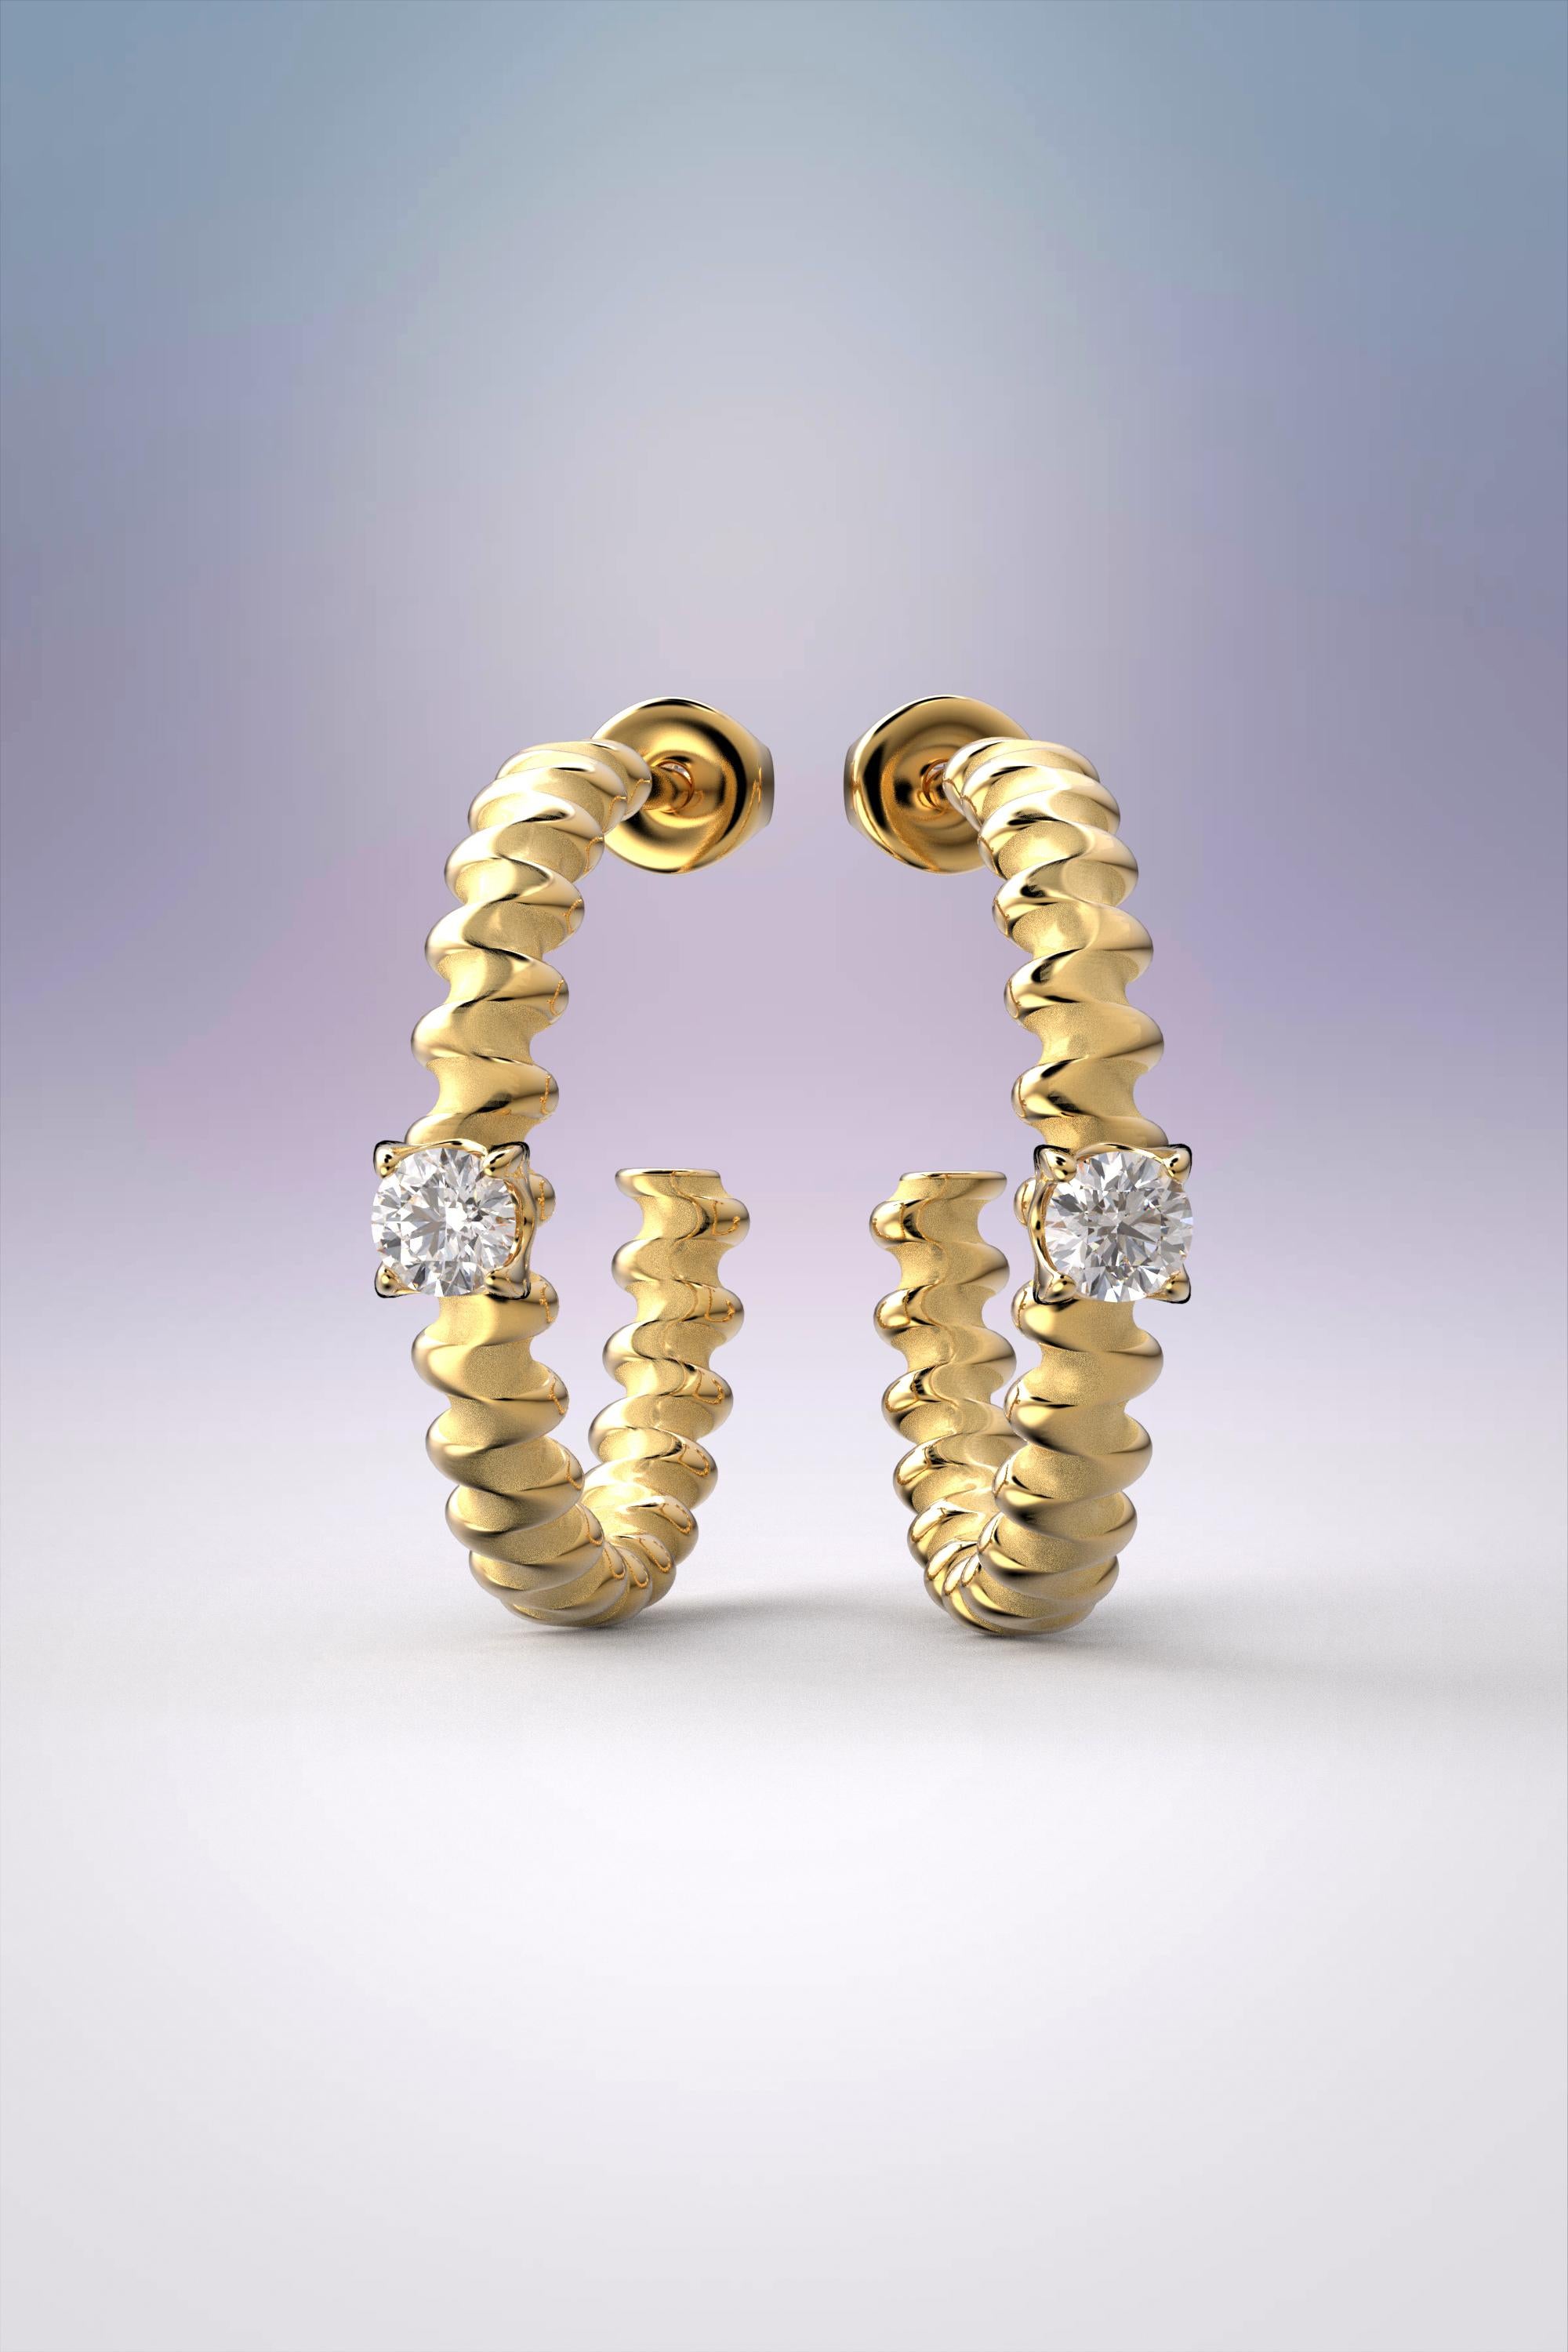 Made to order Diamond hoop earrings, designed and crafted in Italy.
Elegant earrings made in Italy in 18k solid gold with natural diamonds.
18k gold
Size : 19mm x 19mm x 3,3 mm
Gemstones(diamond version) : 2 natural diamonds cts 0,2 tw G